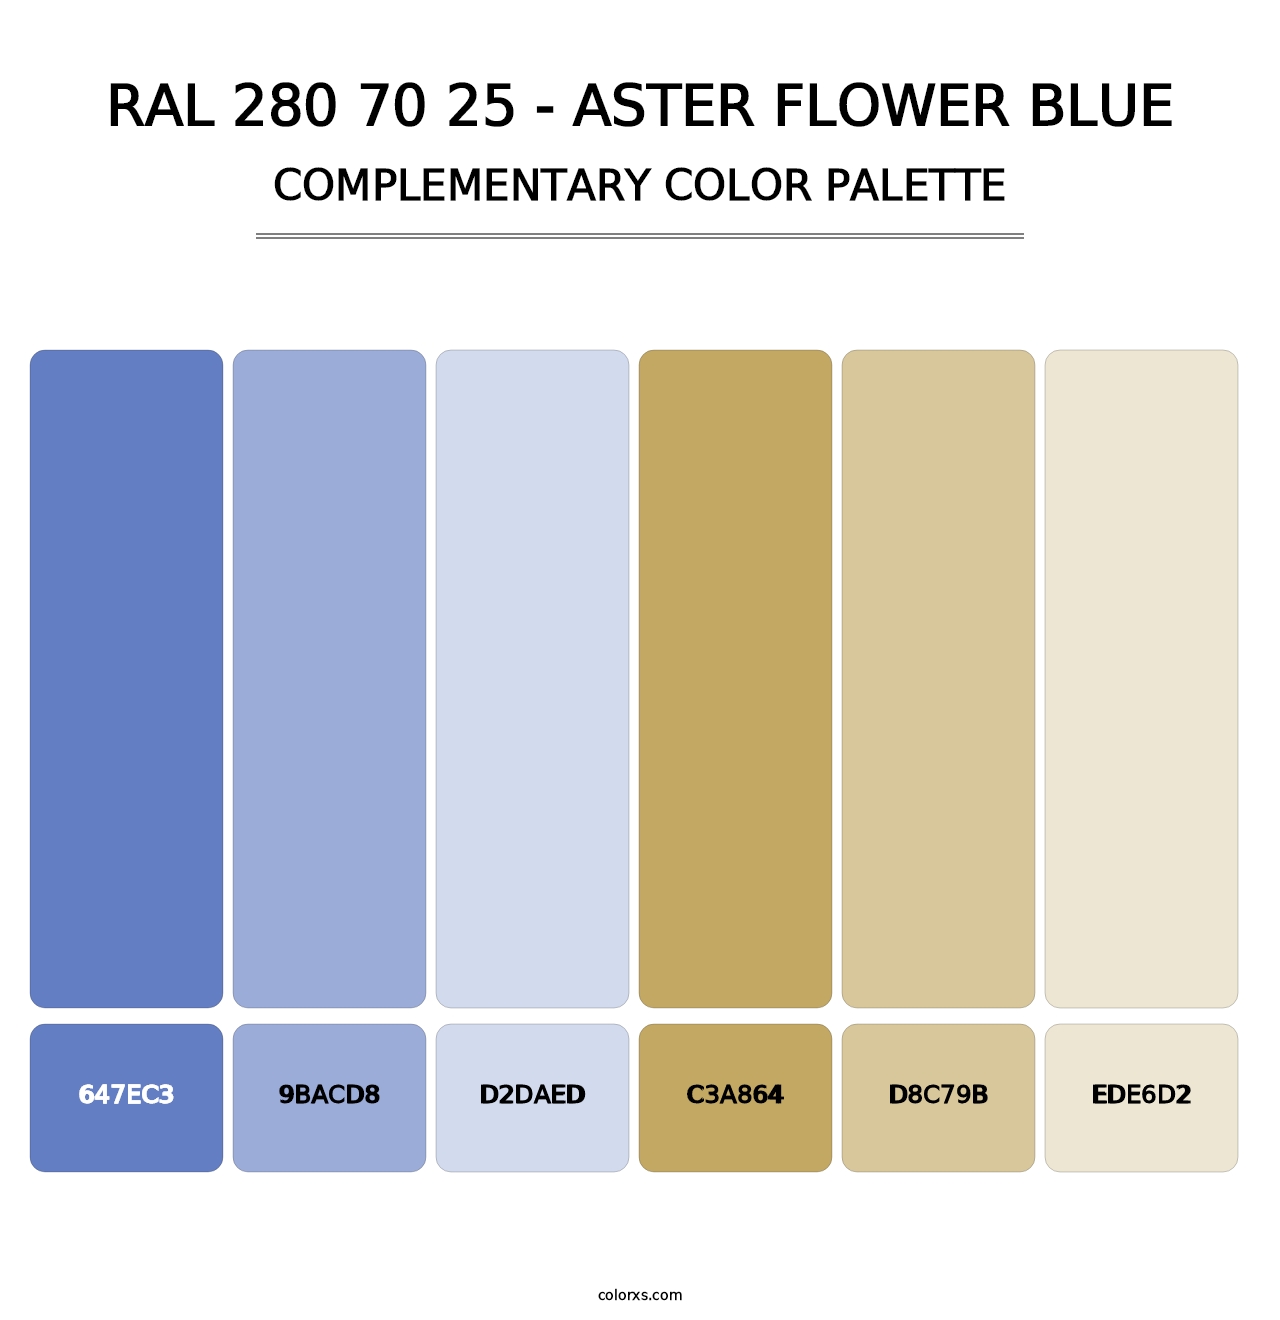 RAL 280 70 25 - Aster Flower Blue - Complementary Color Palette